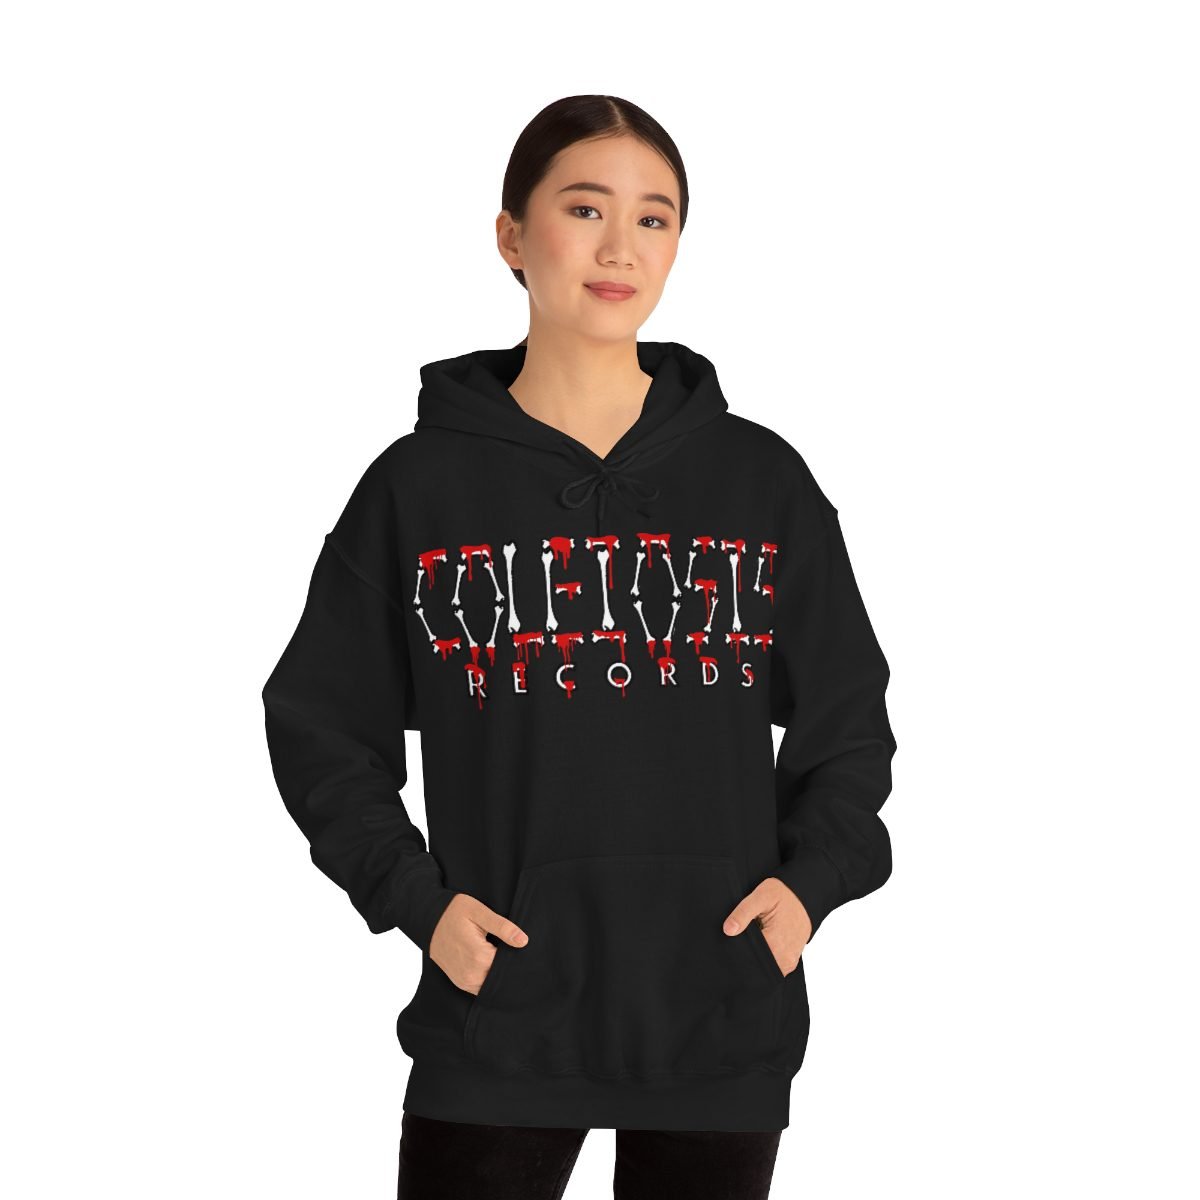 Coleiosis Records Logo Pullover Hooded Sweatshirt 185MD